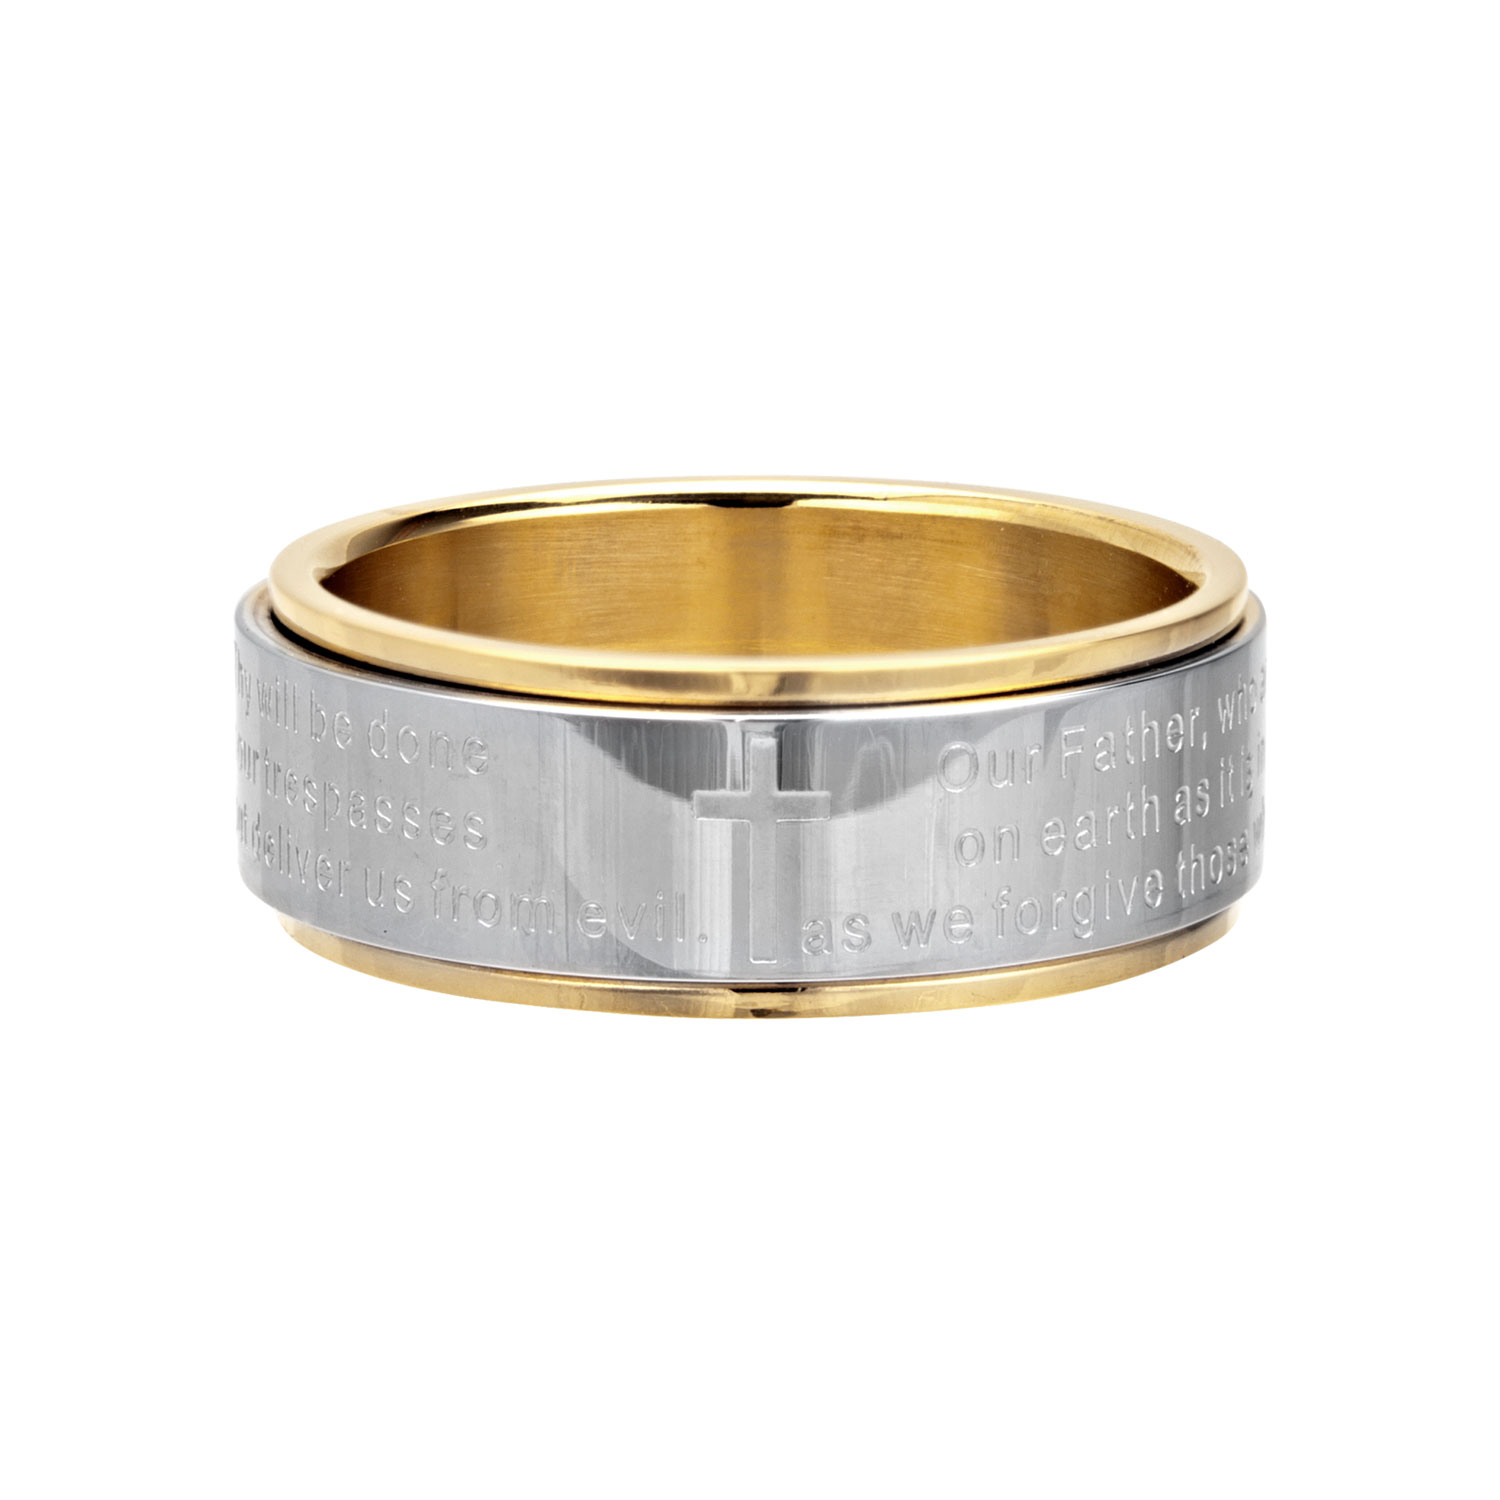 Gold Plated Center Lord's Prayer Spinner Ring Image 2 Glatz Jewelry Aliquippa, PA